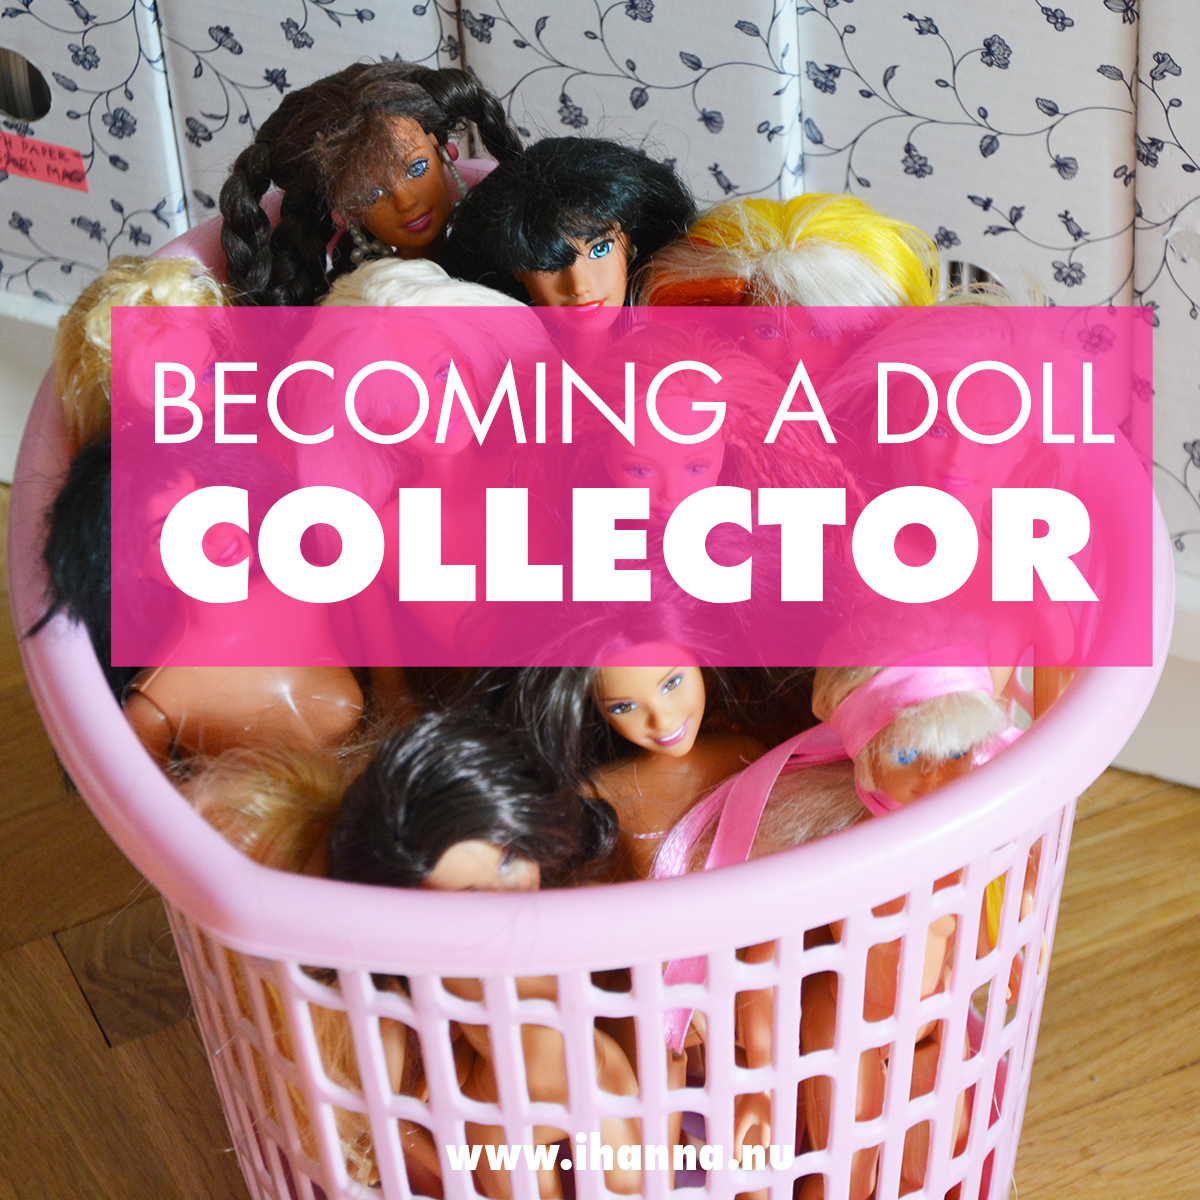 local barbie doll collectors